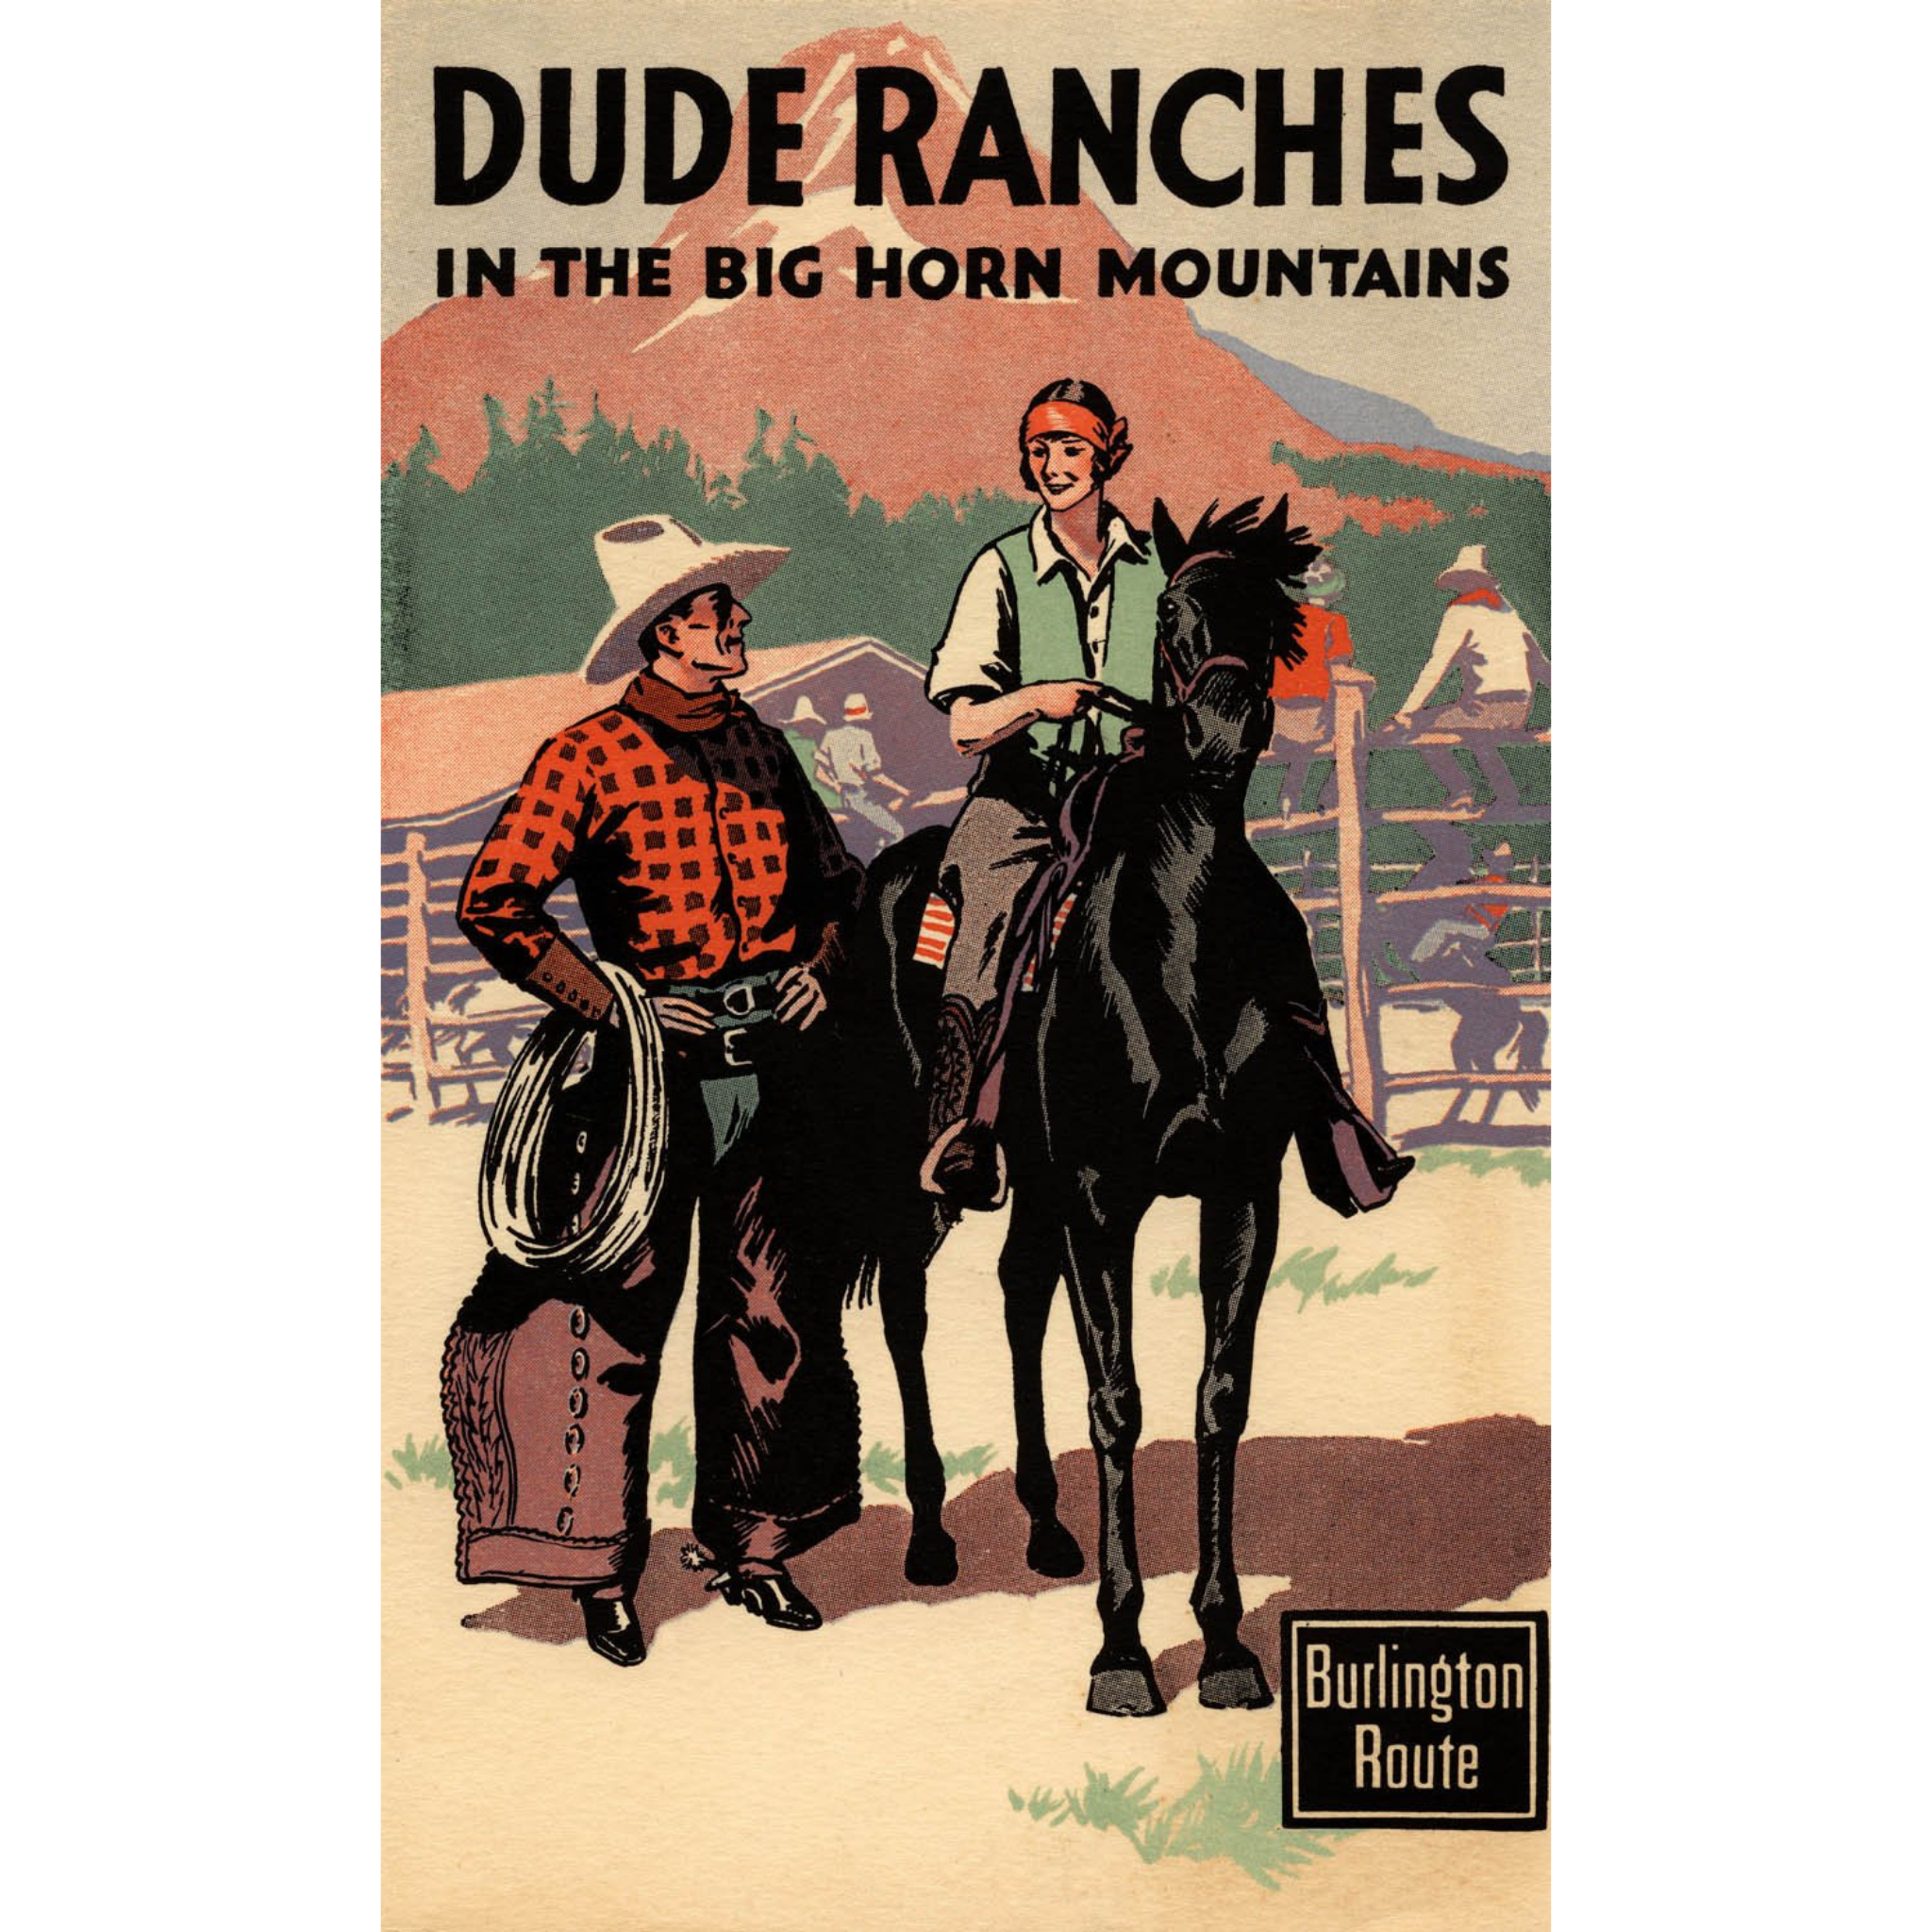 Dude Ranches in the  Big Horn Mountains - Burlington Route - ca. 1930 Lithograph